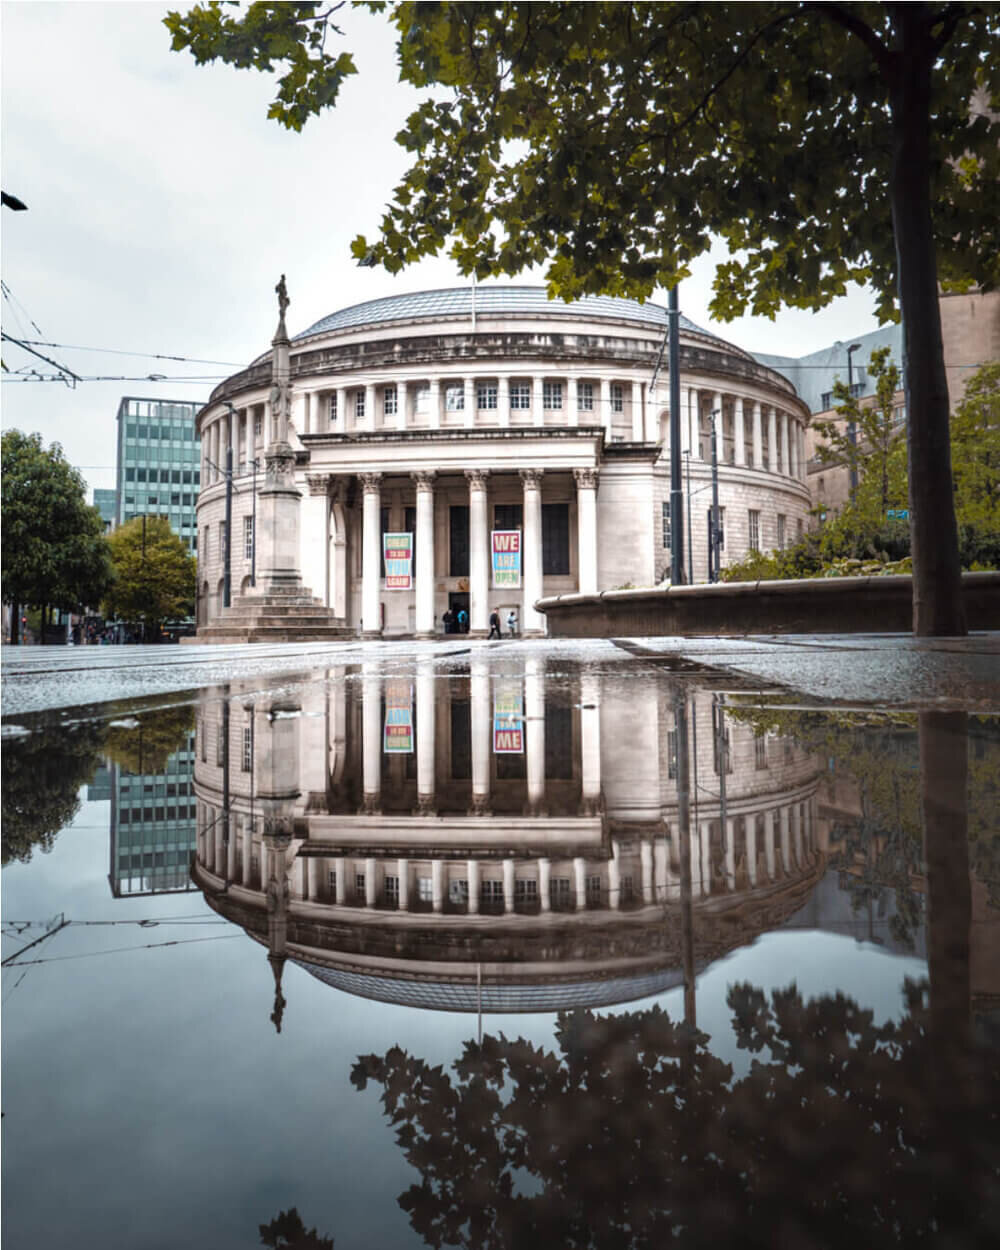 Manchester Central Library photography by Chris Curry showing a perfect reflection after a rainy day in the city